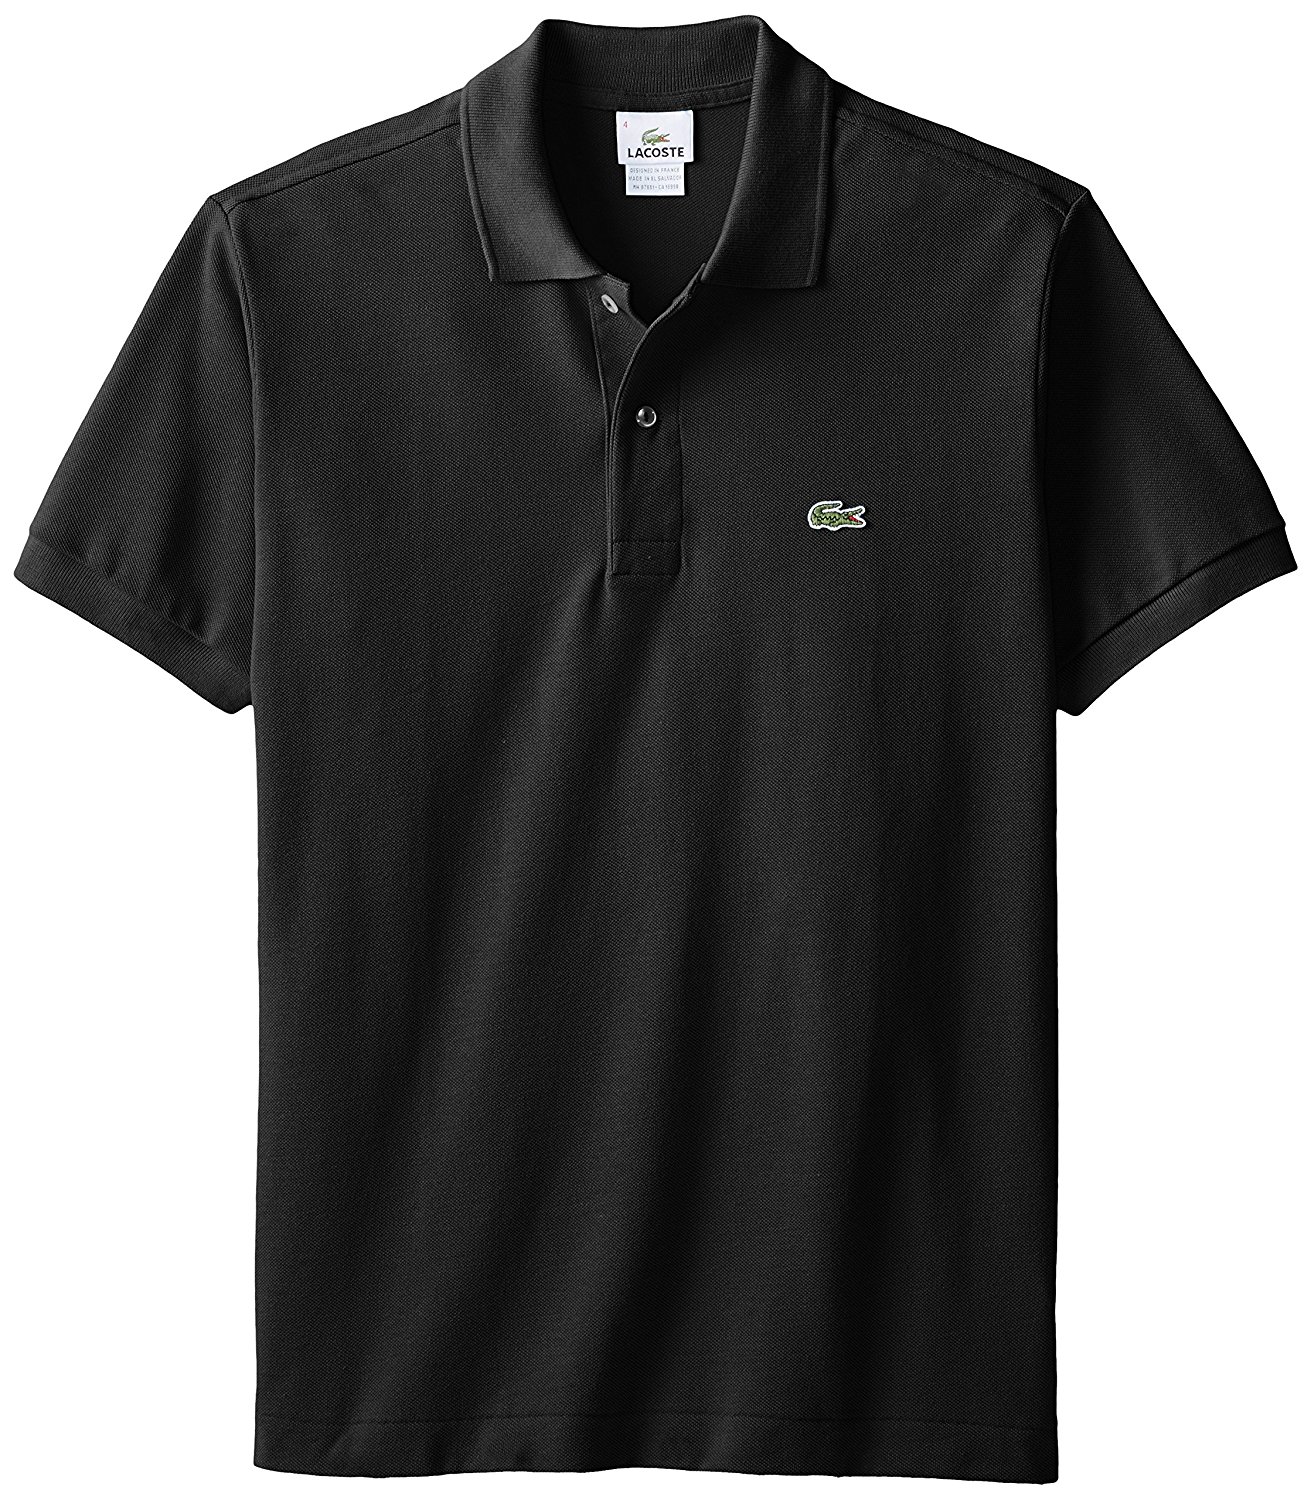 Lacoste polo shirt ... picture 2 of 2 DROCTYA